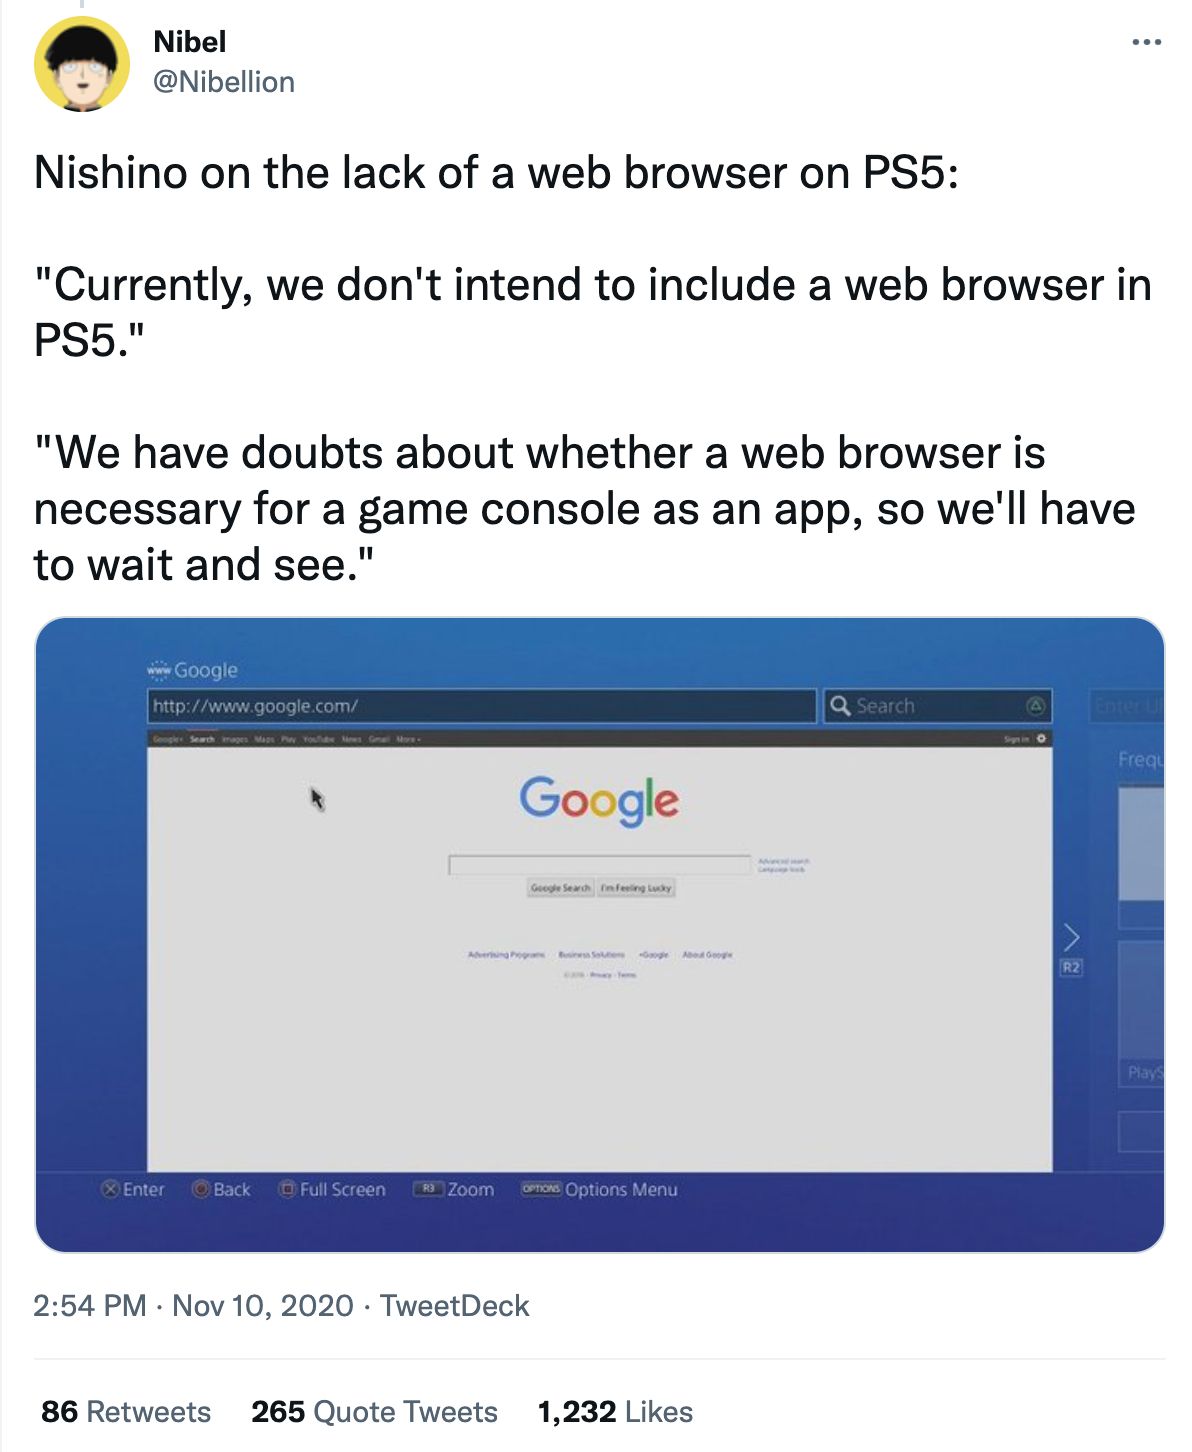 Why PS5 doesn't have a web browser?